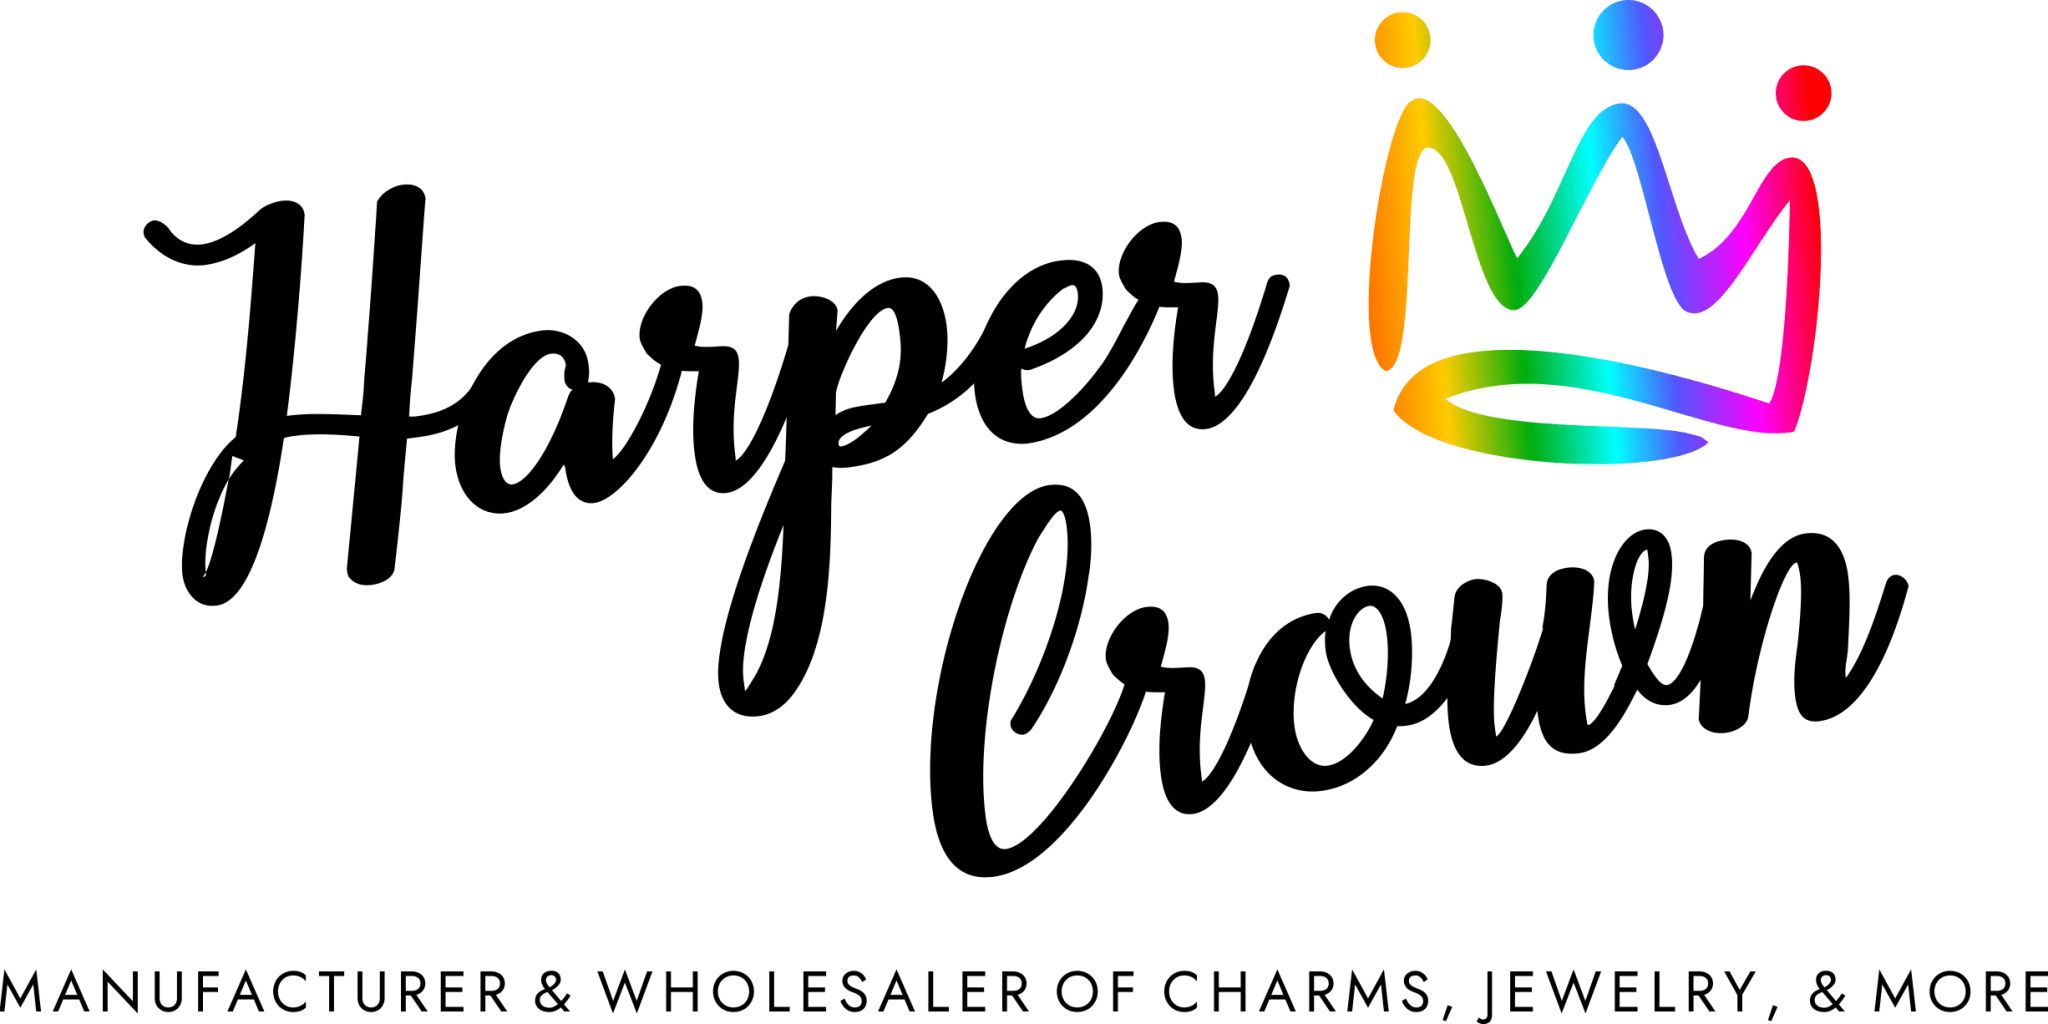 All About Jewelry Manufacturers and Wholesalers - HarperCrown